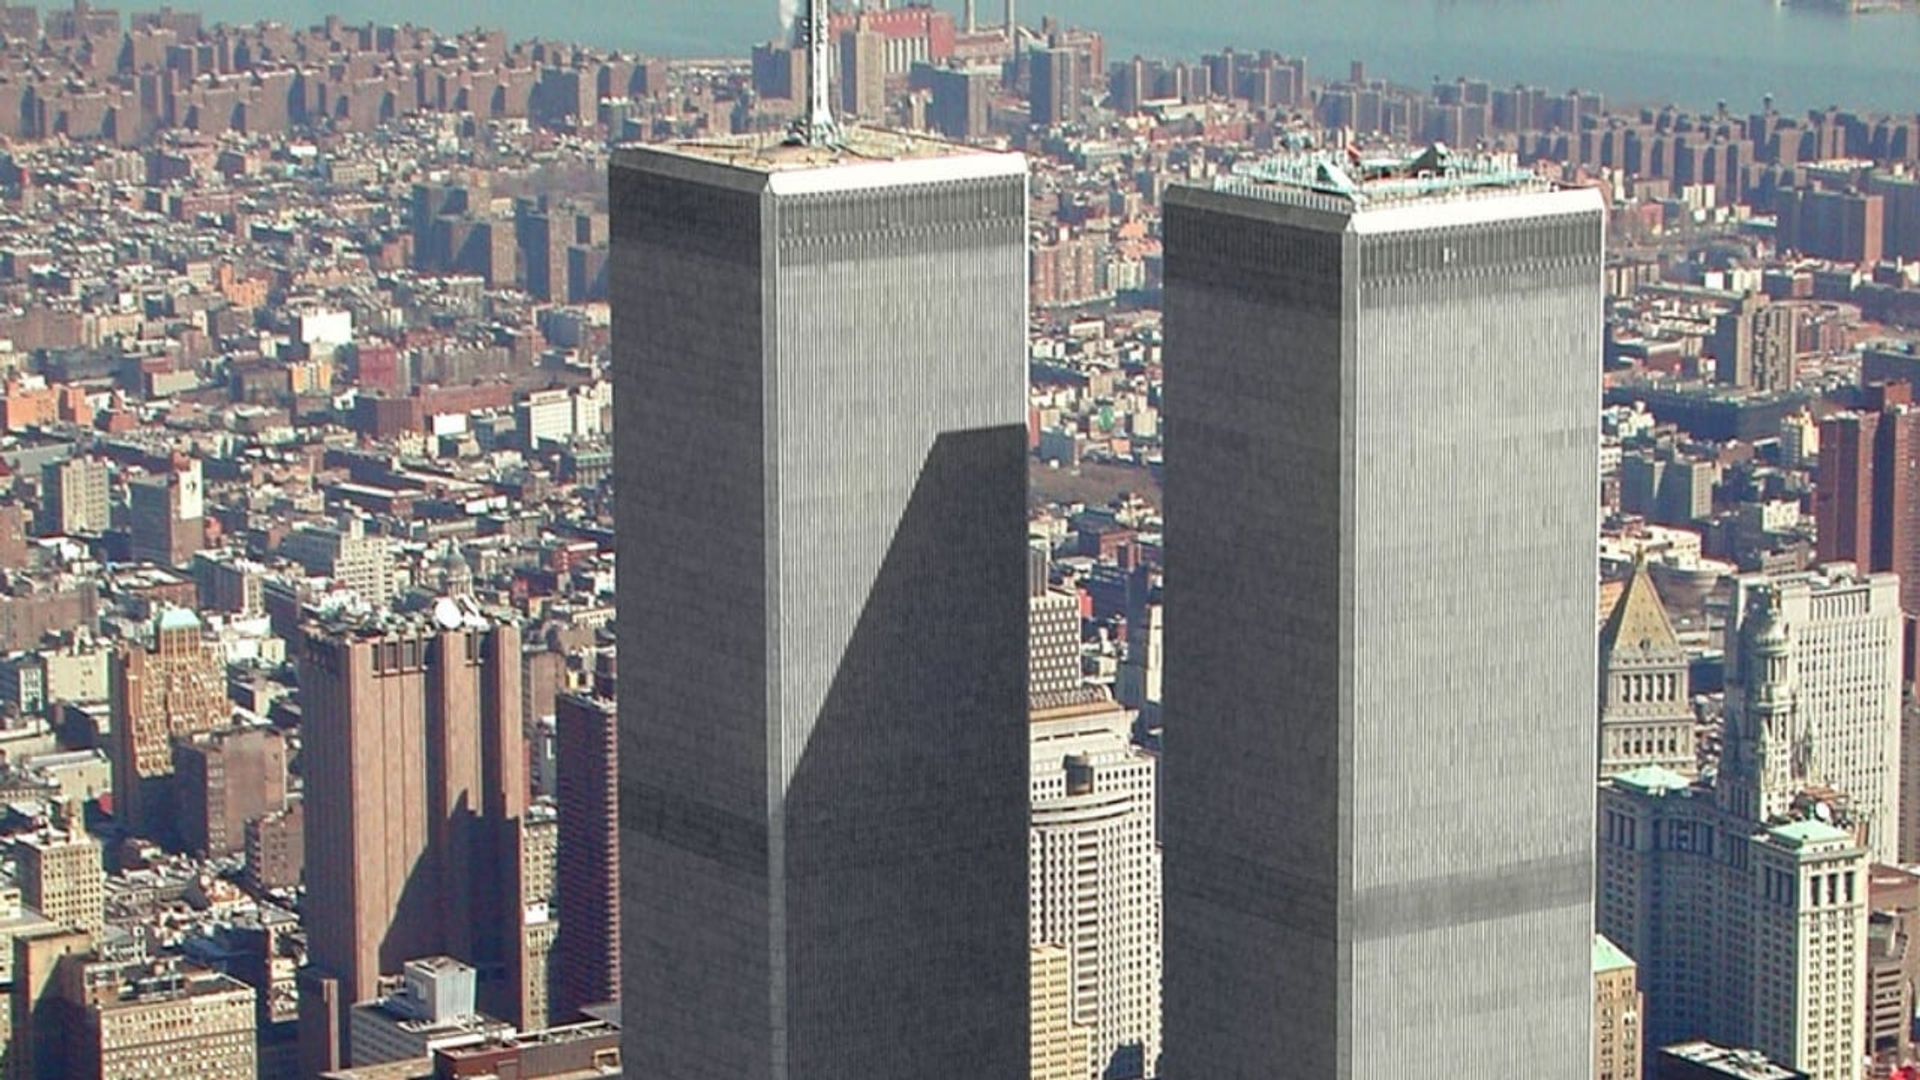 National Geographic: Inside 9/11 background